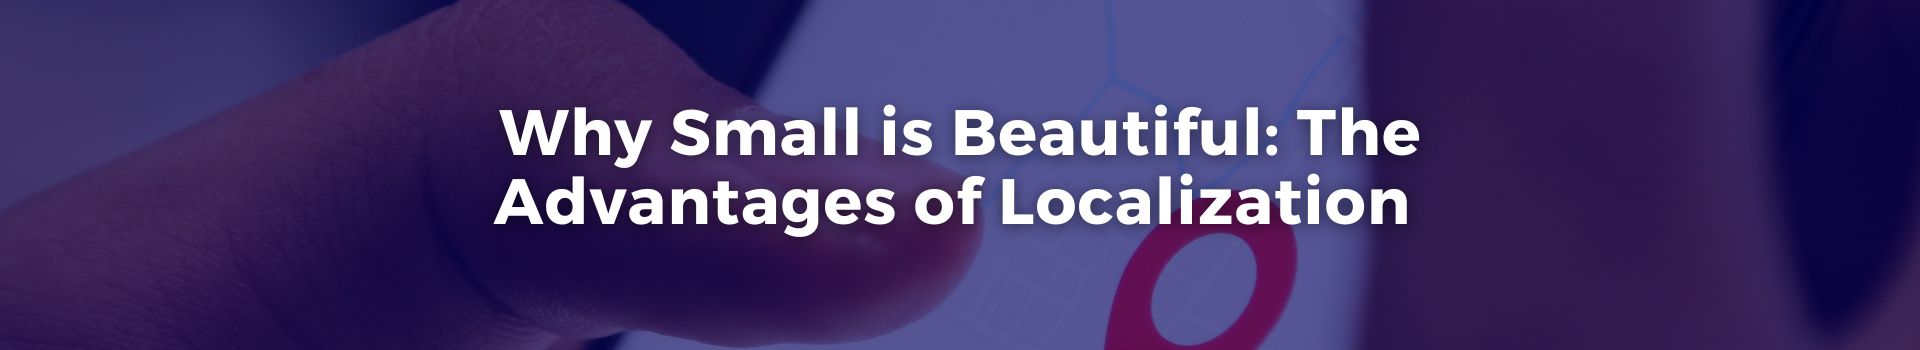 why-small-is-beautiful-the-advantages-of-localization-tobias-roberts-five-banner